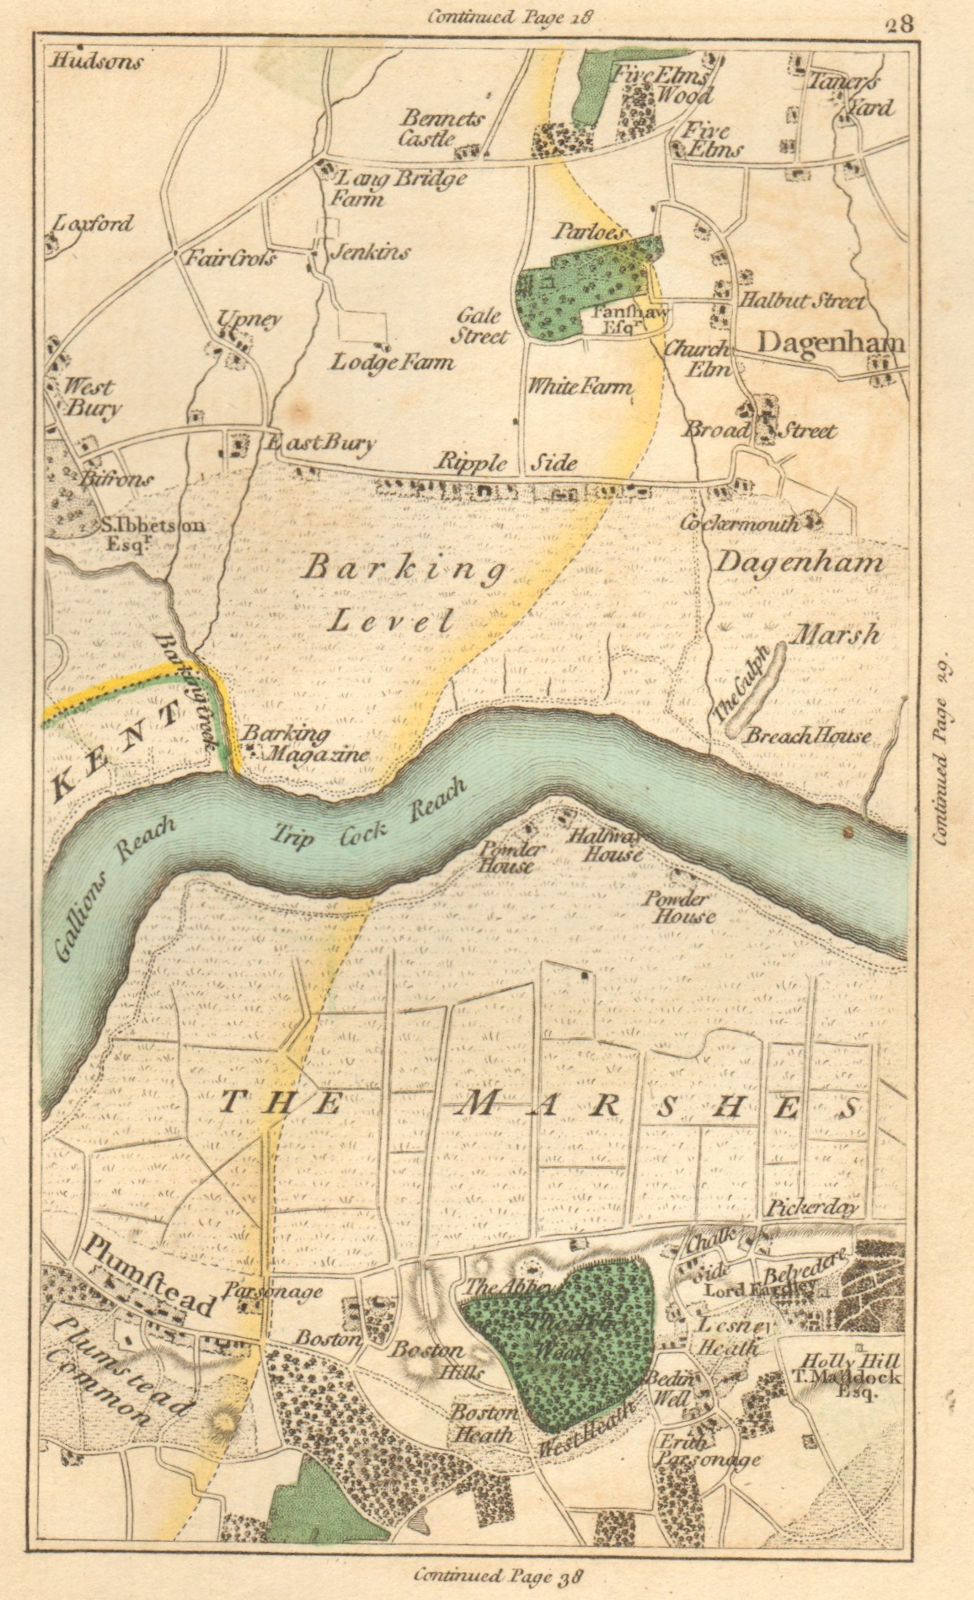 DAGENHAM. Plumstead, Woolwich, Barking, Ilford, Becontree, Thamesmead 1811 map